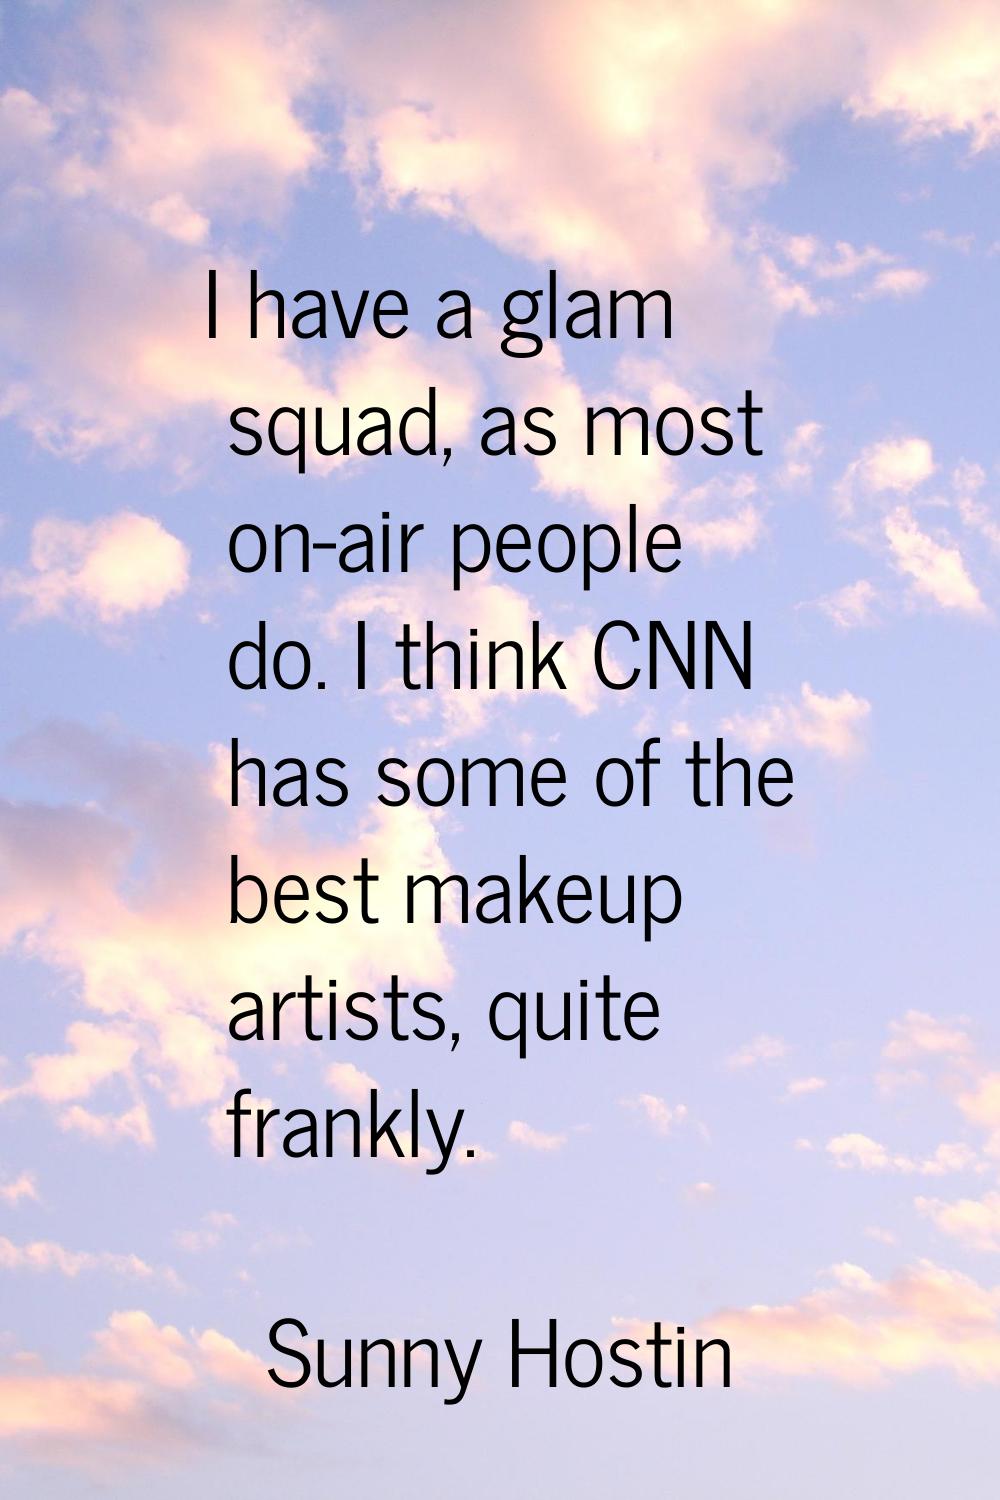 I have a glam squad, as most on-air people do. I think CNN has some of the best makeup artists, qui